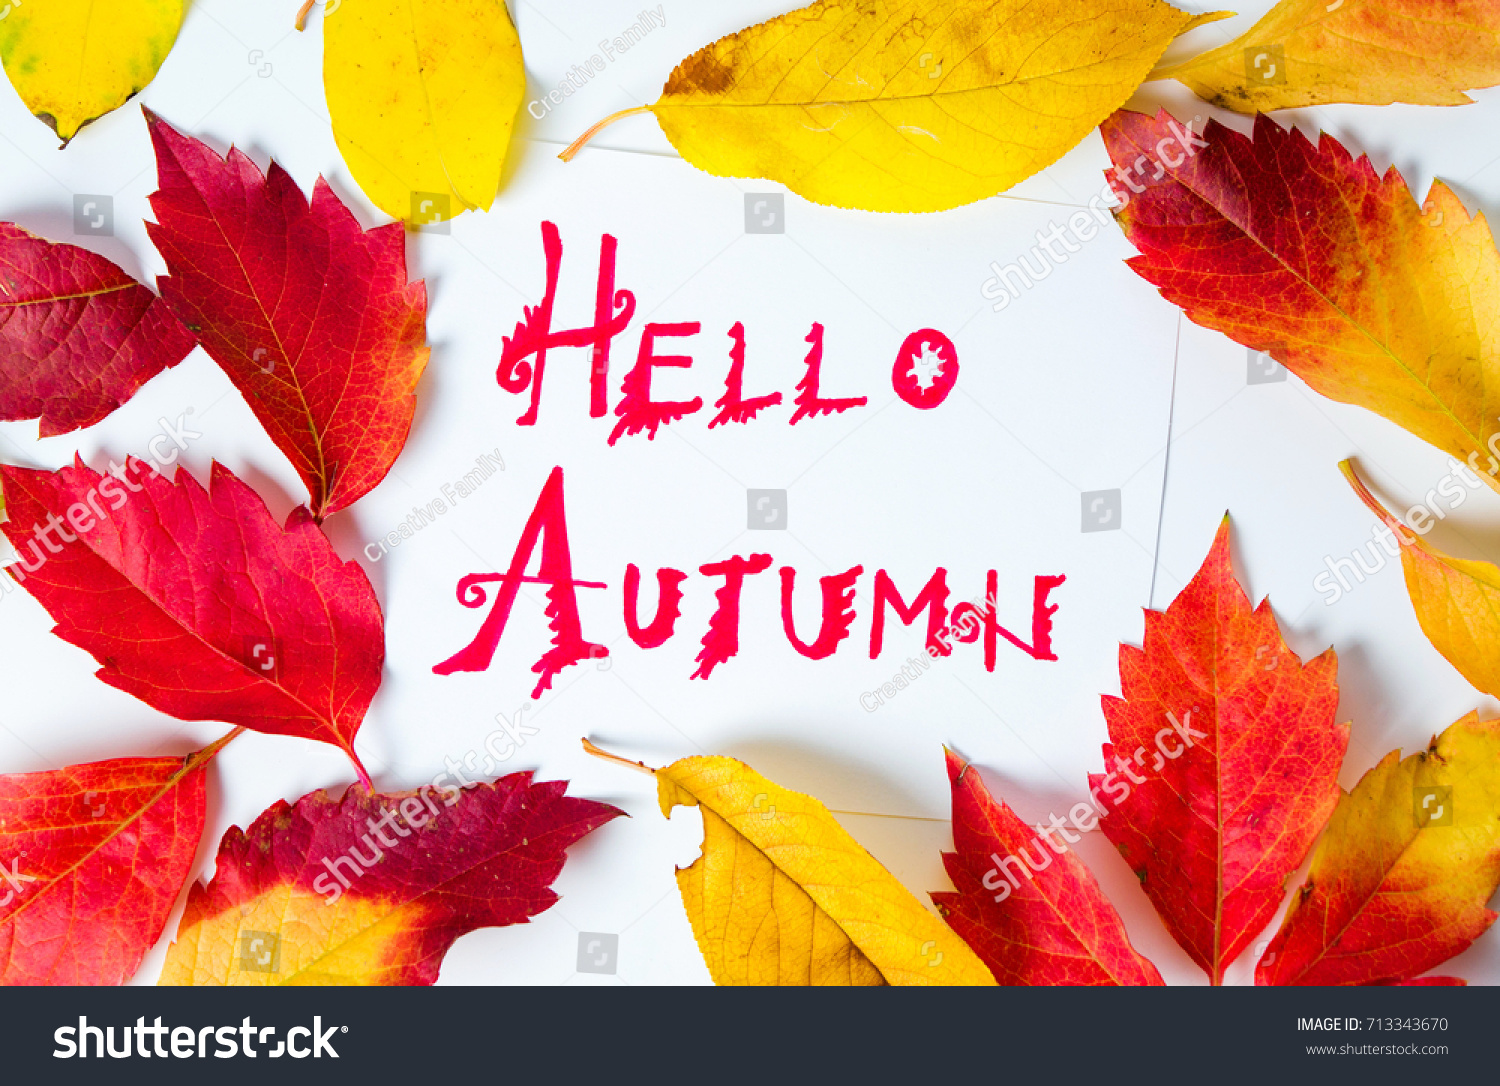 Hello Autumn calligraphy note with fallen leaves on white paper #713343670